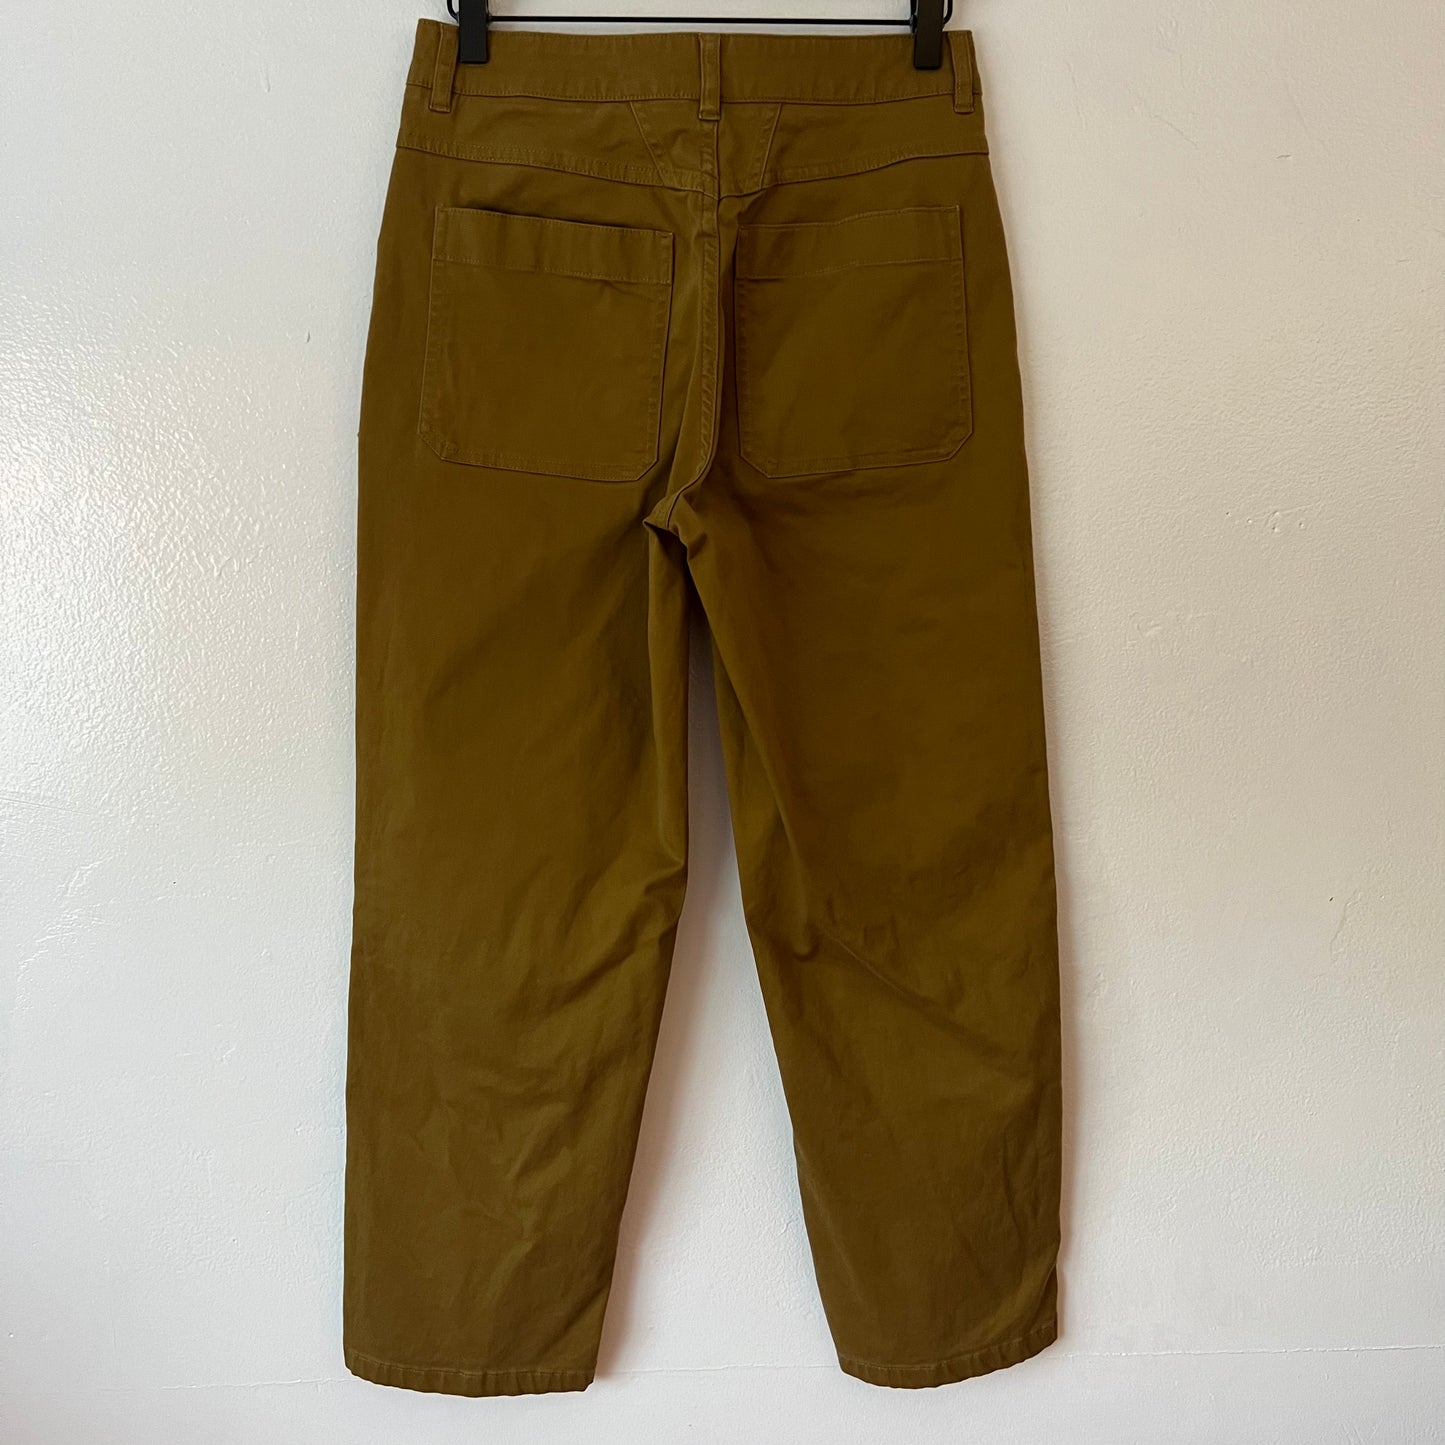 CLOSED Abe Pants in Golden Brown